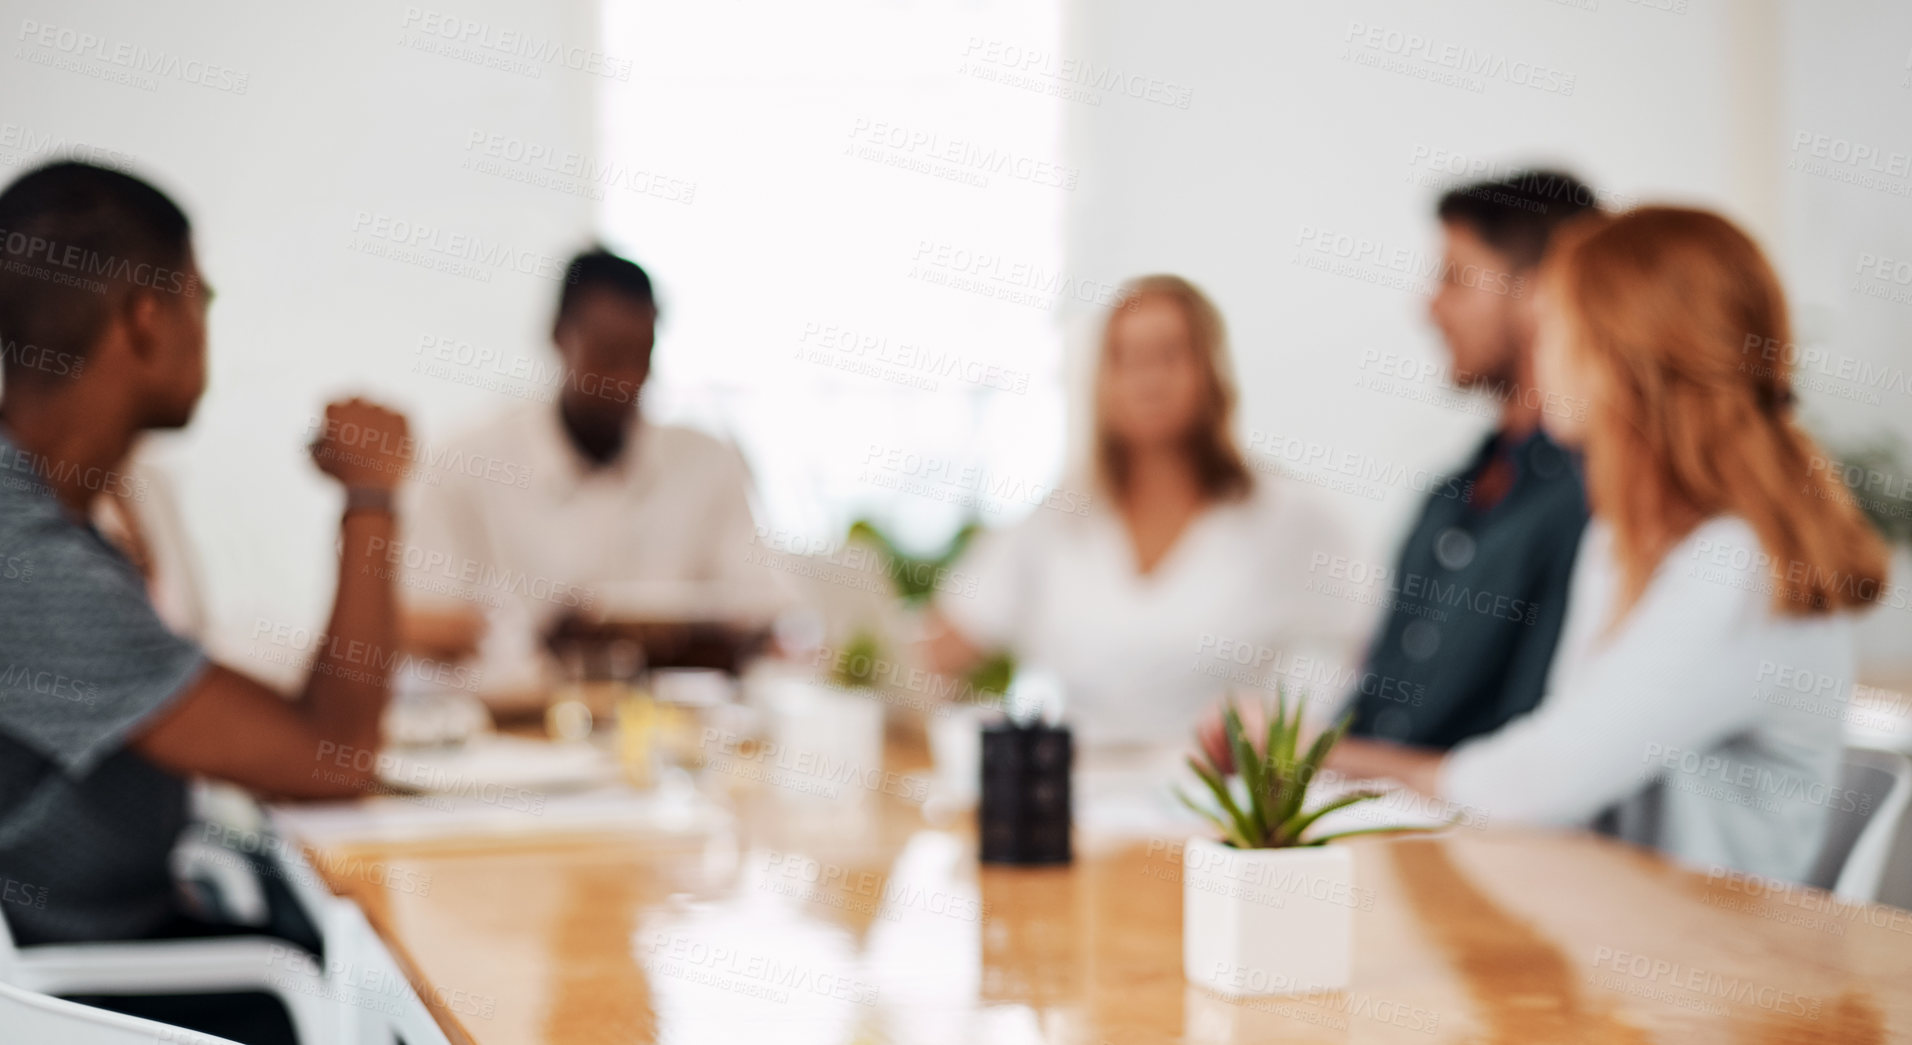 Buy stock photo Defocused shot of a group of businesspeople having a meeting in an office